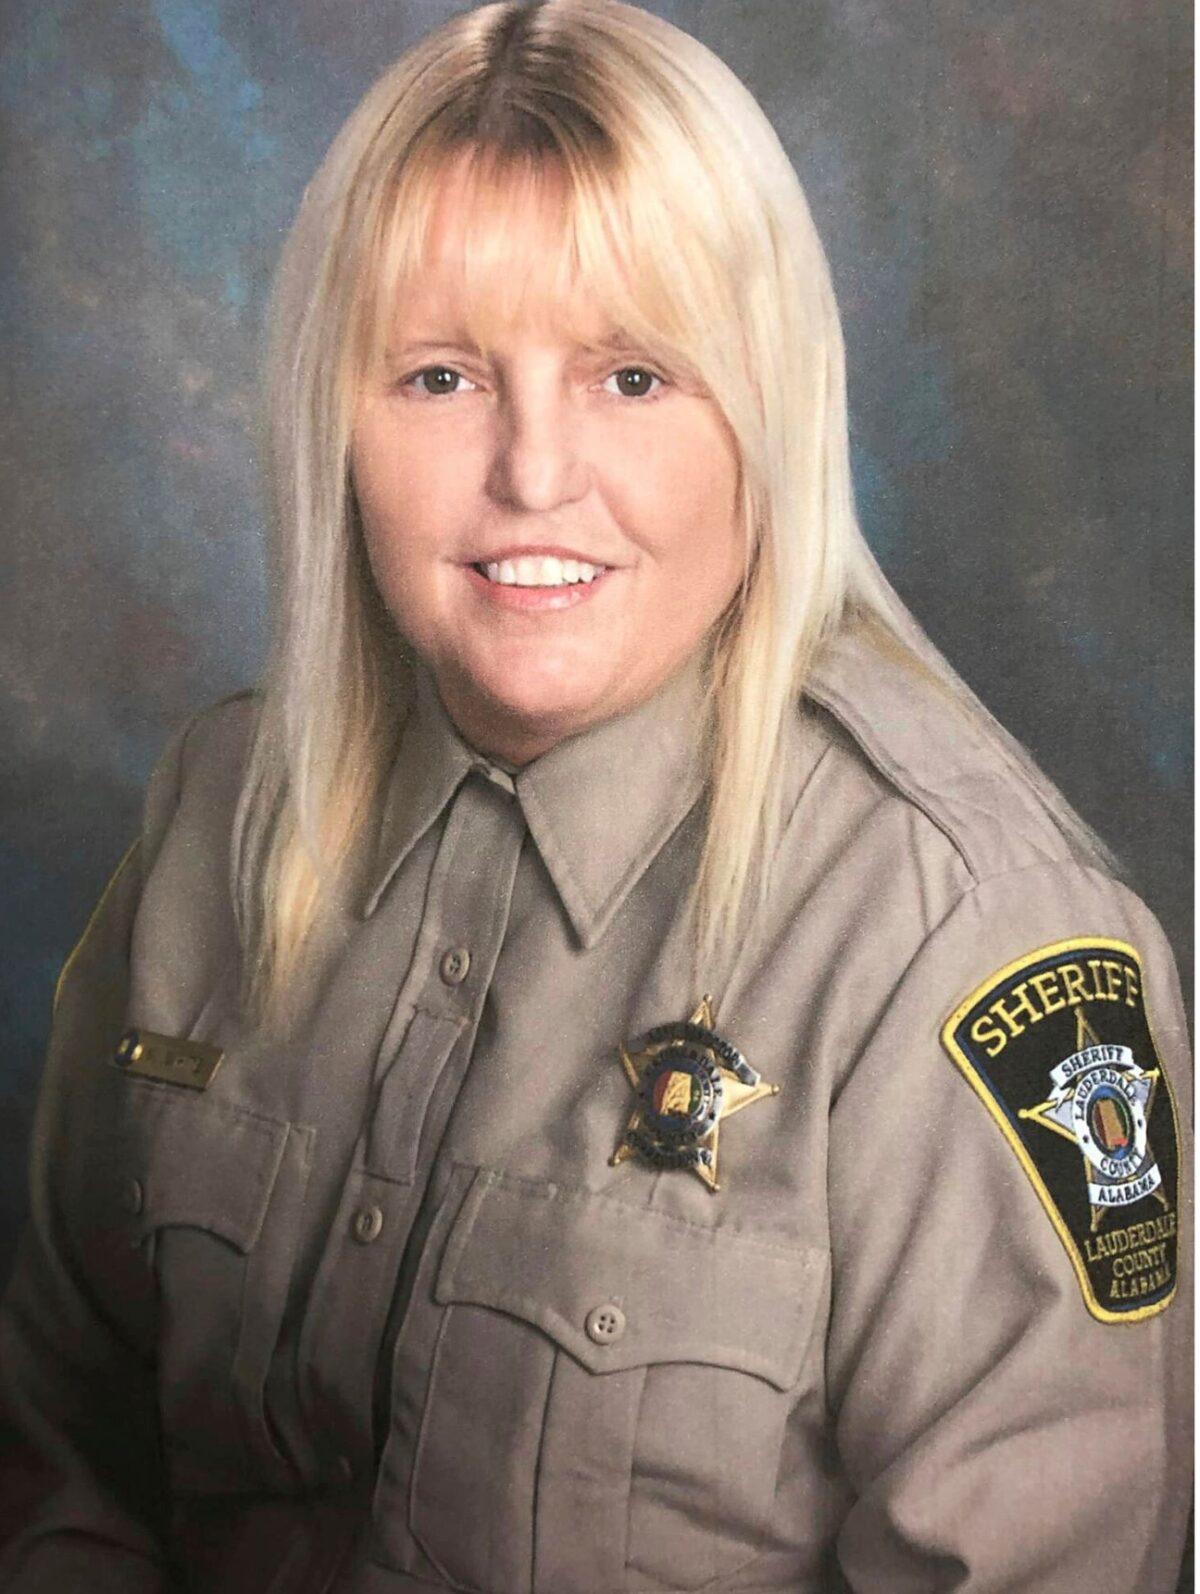 Lauderdale County Detention Center assistant director Vicki White. (Lauderdale County Sheriff's Office via AP)